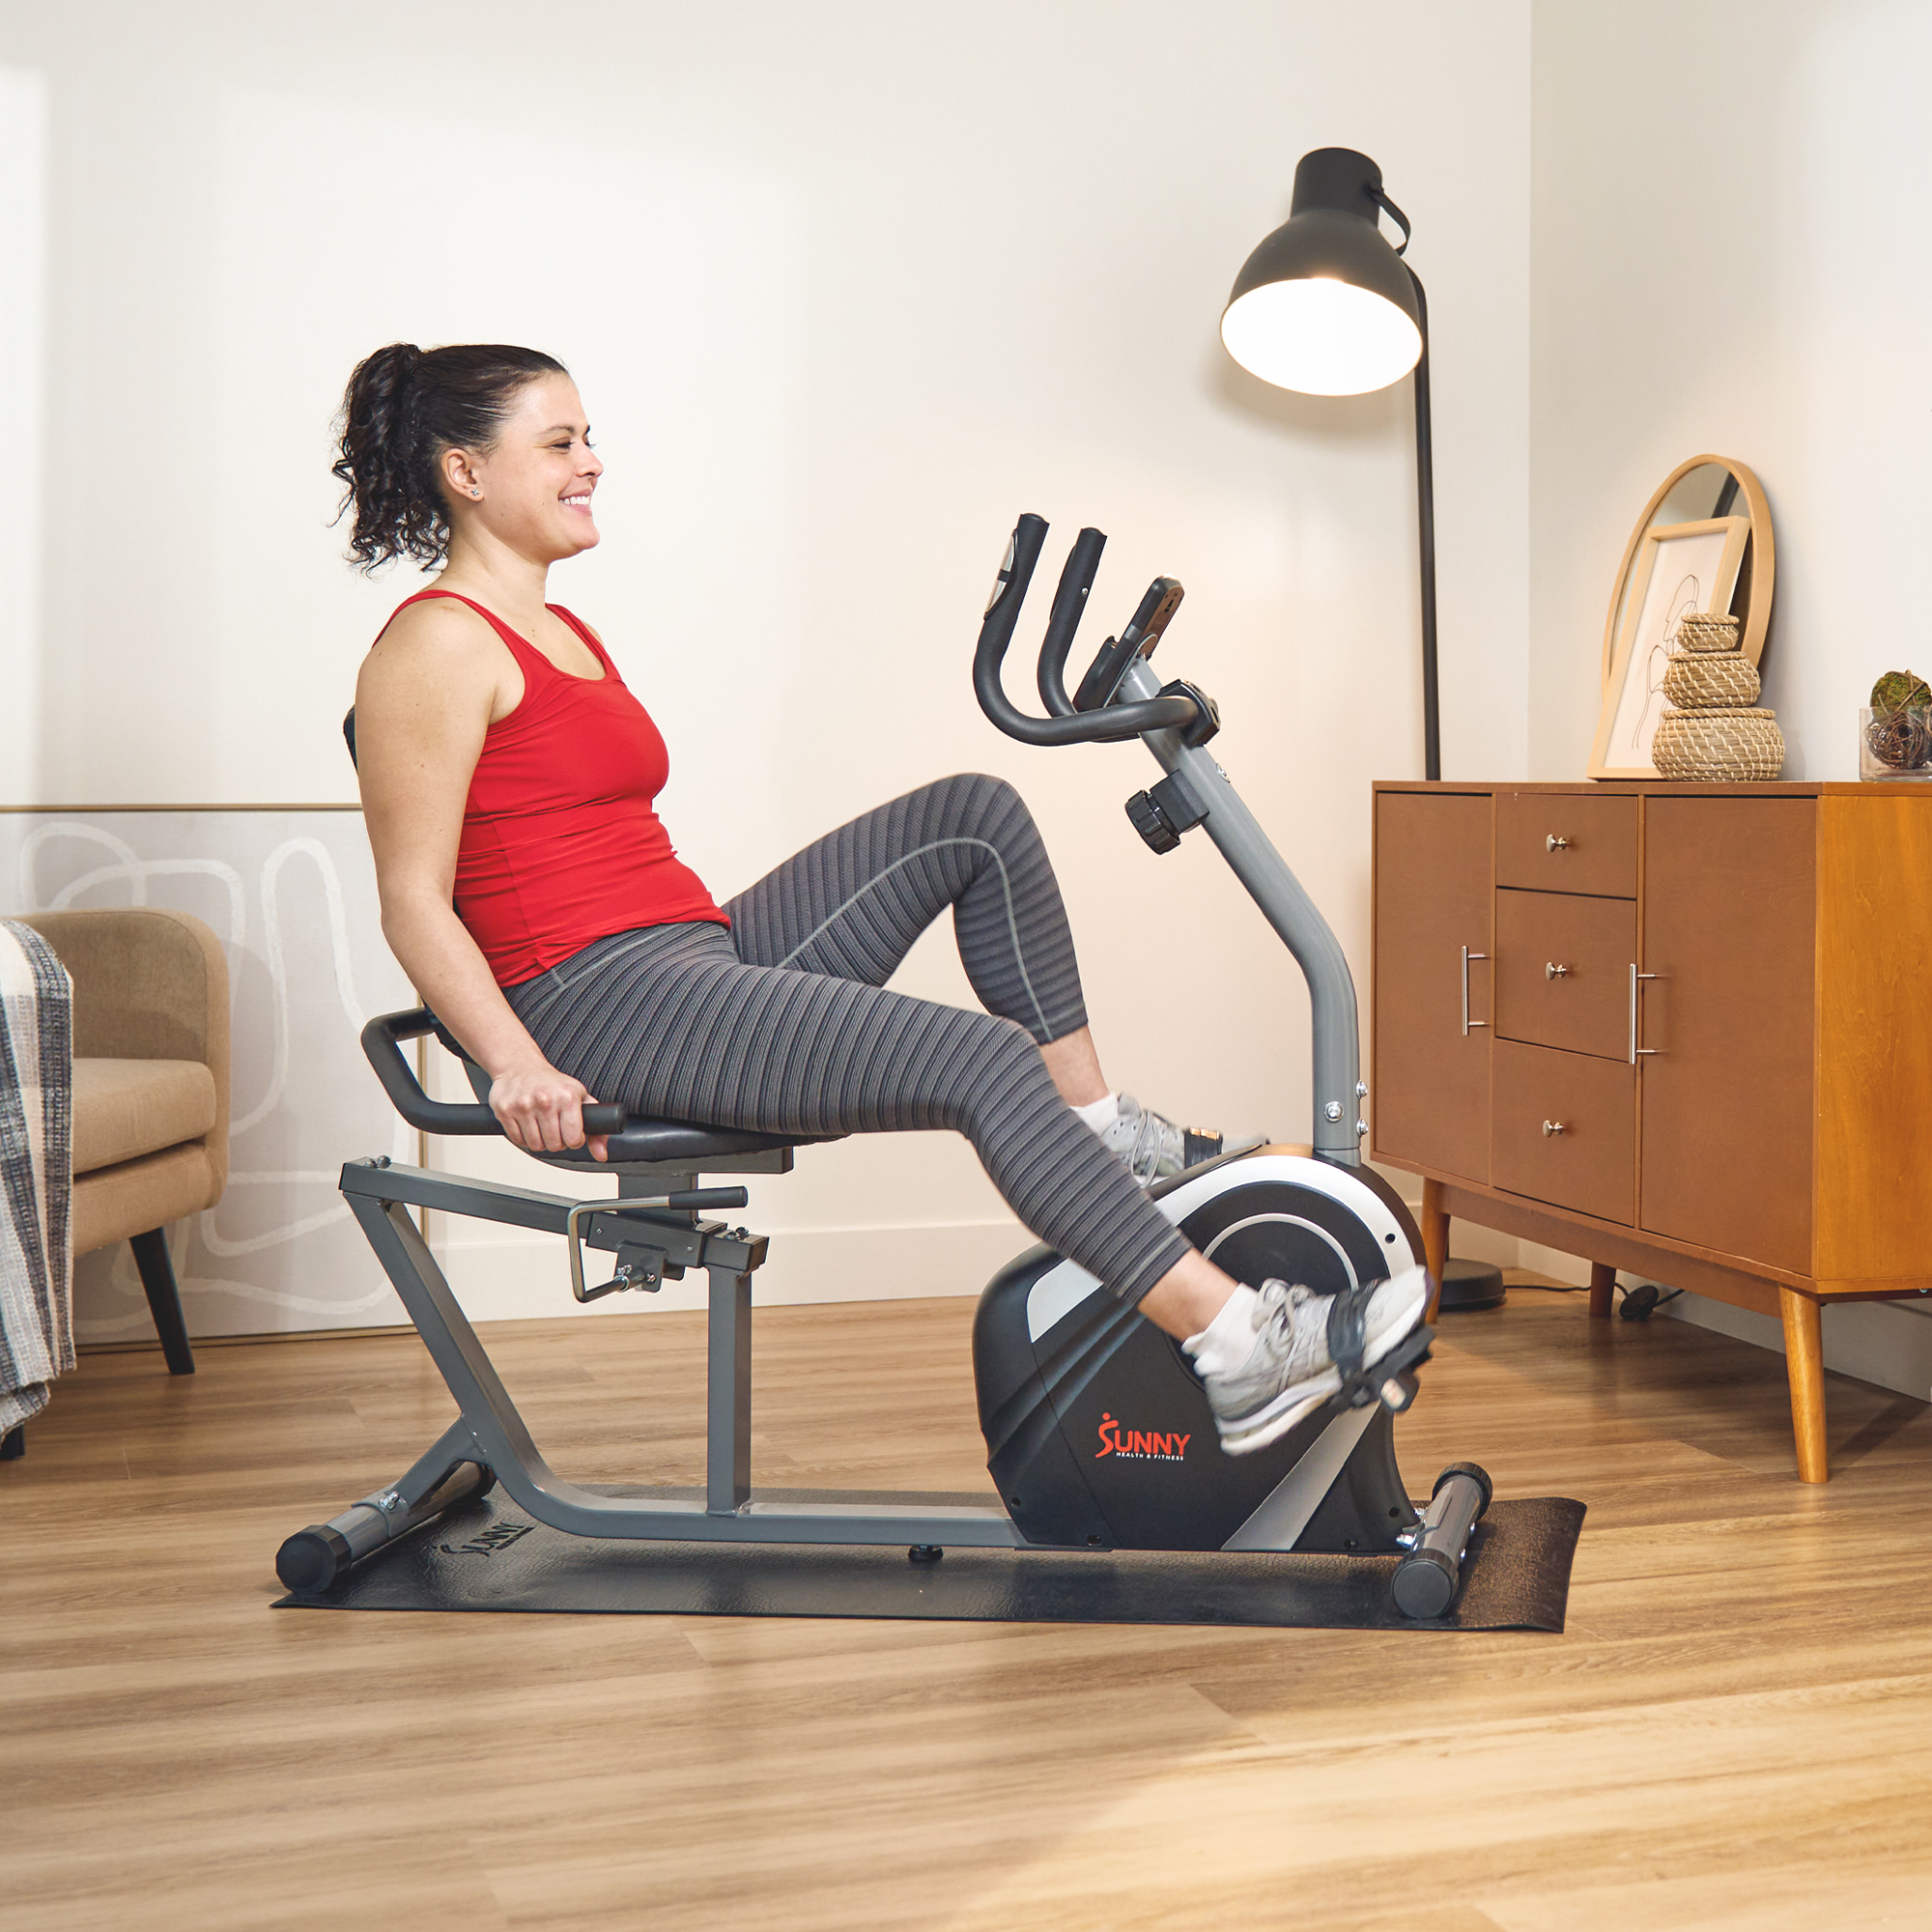 Sunny Health & Fitness Magnetic Recumbent Bike Exercise Bike, 300lb Capacity, Easy Adjustable Seat, Monitor, Pulse Rate Monitoring - SF-RB4616S - image 3 of 5